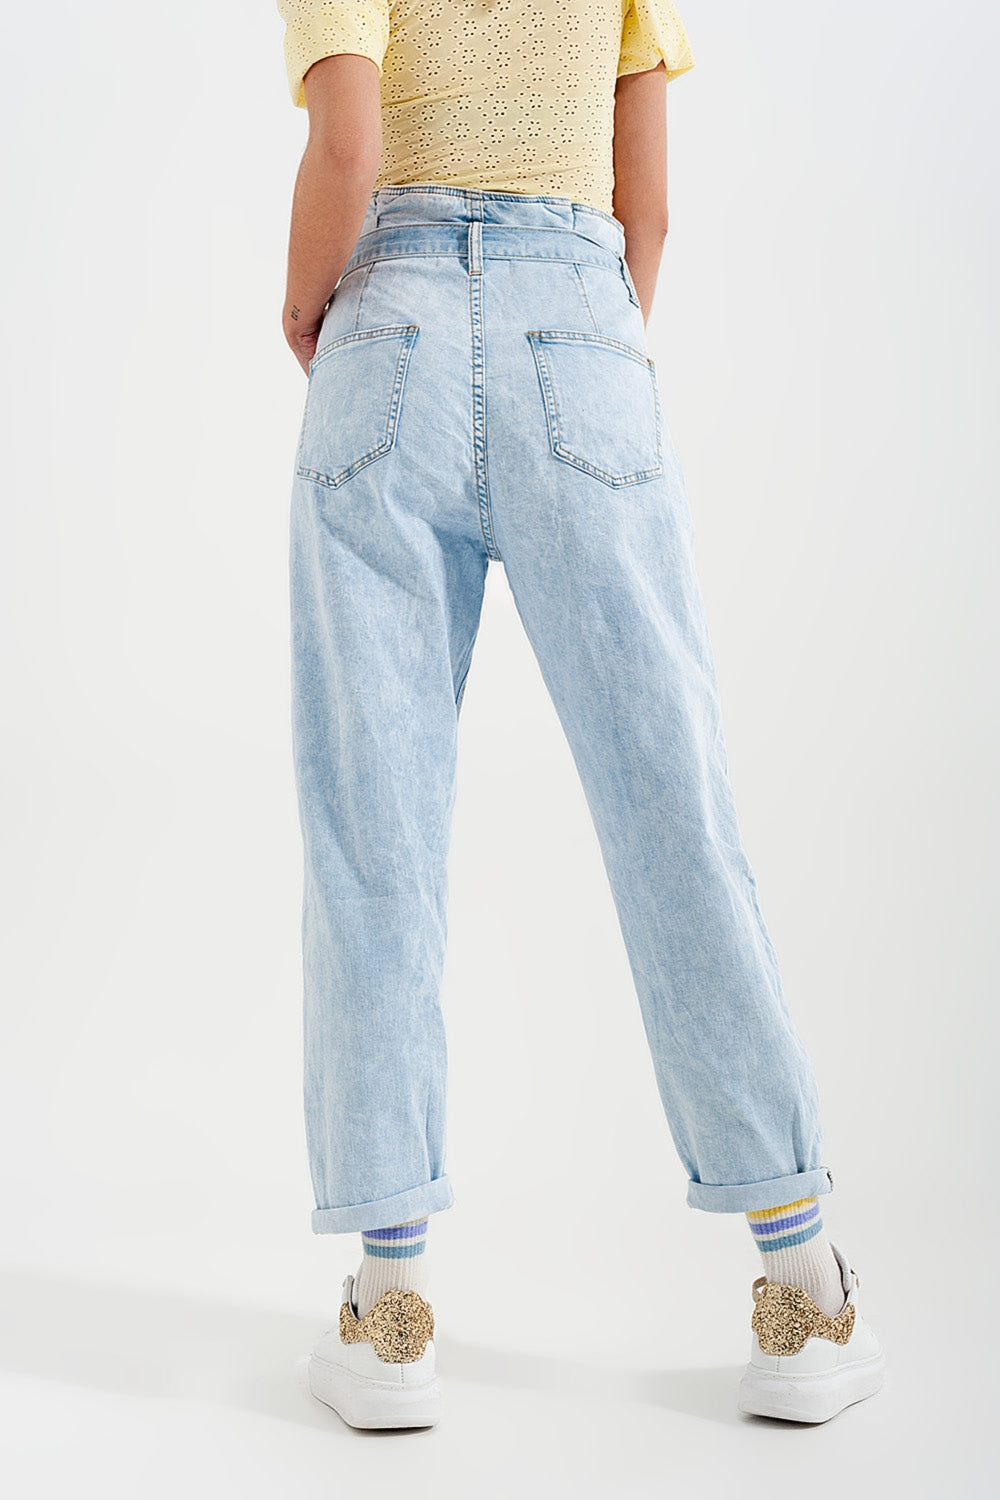 Tapered leg jeans with paper bag waist in light vintage wash Szua Store